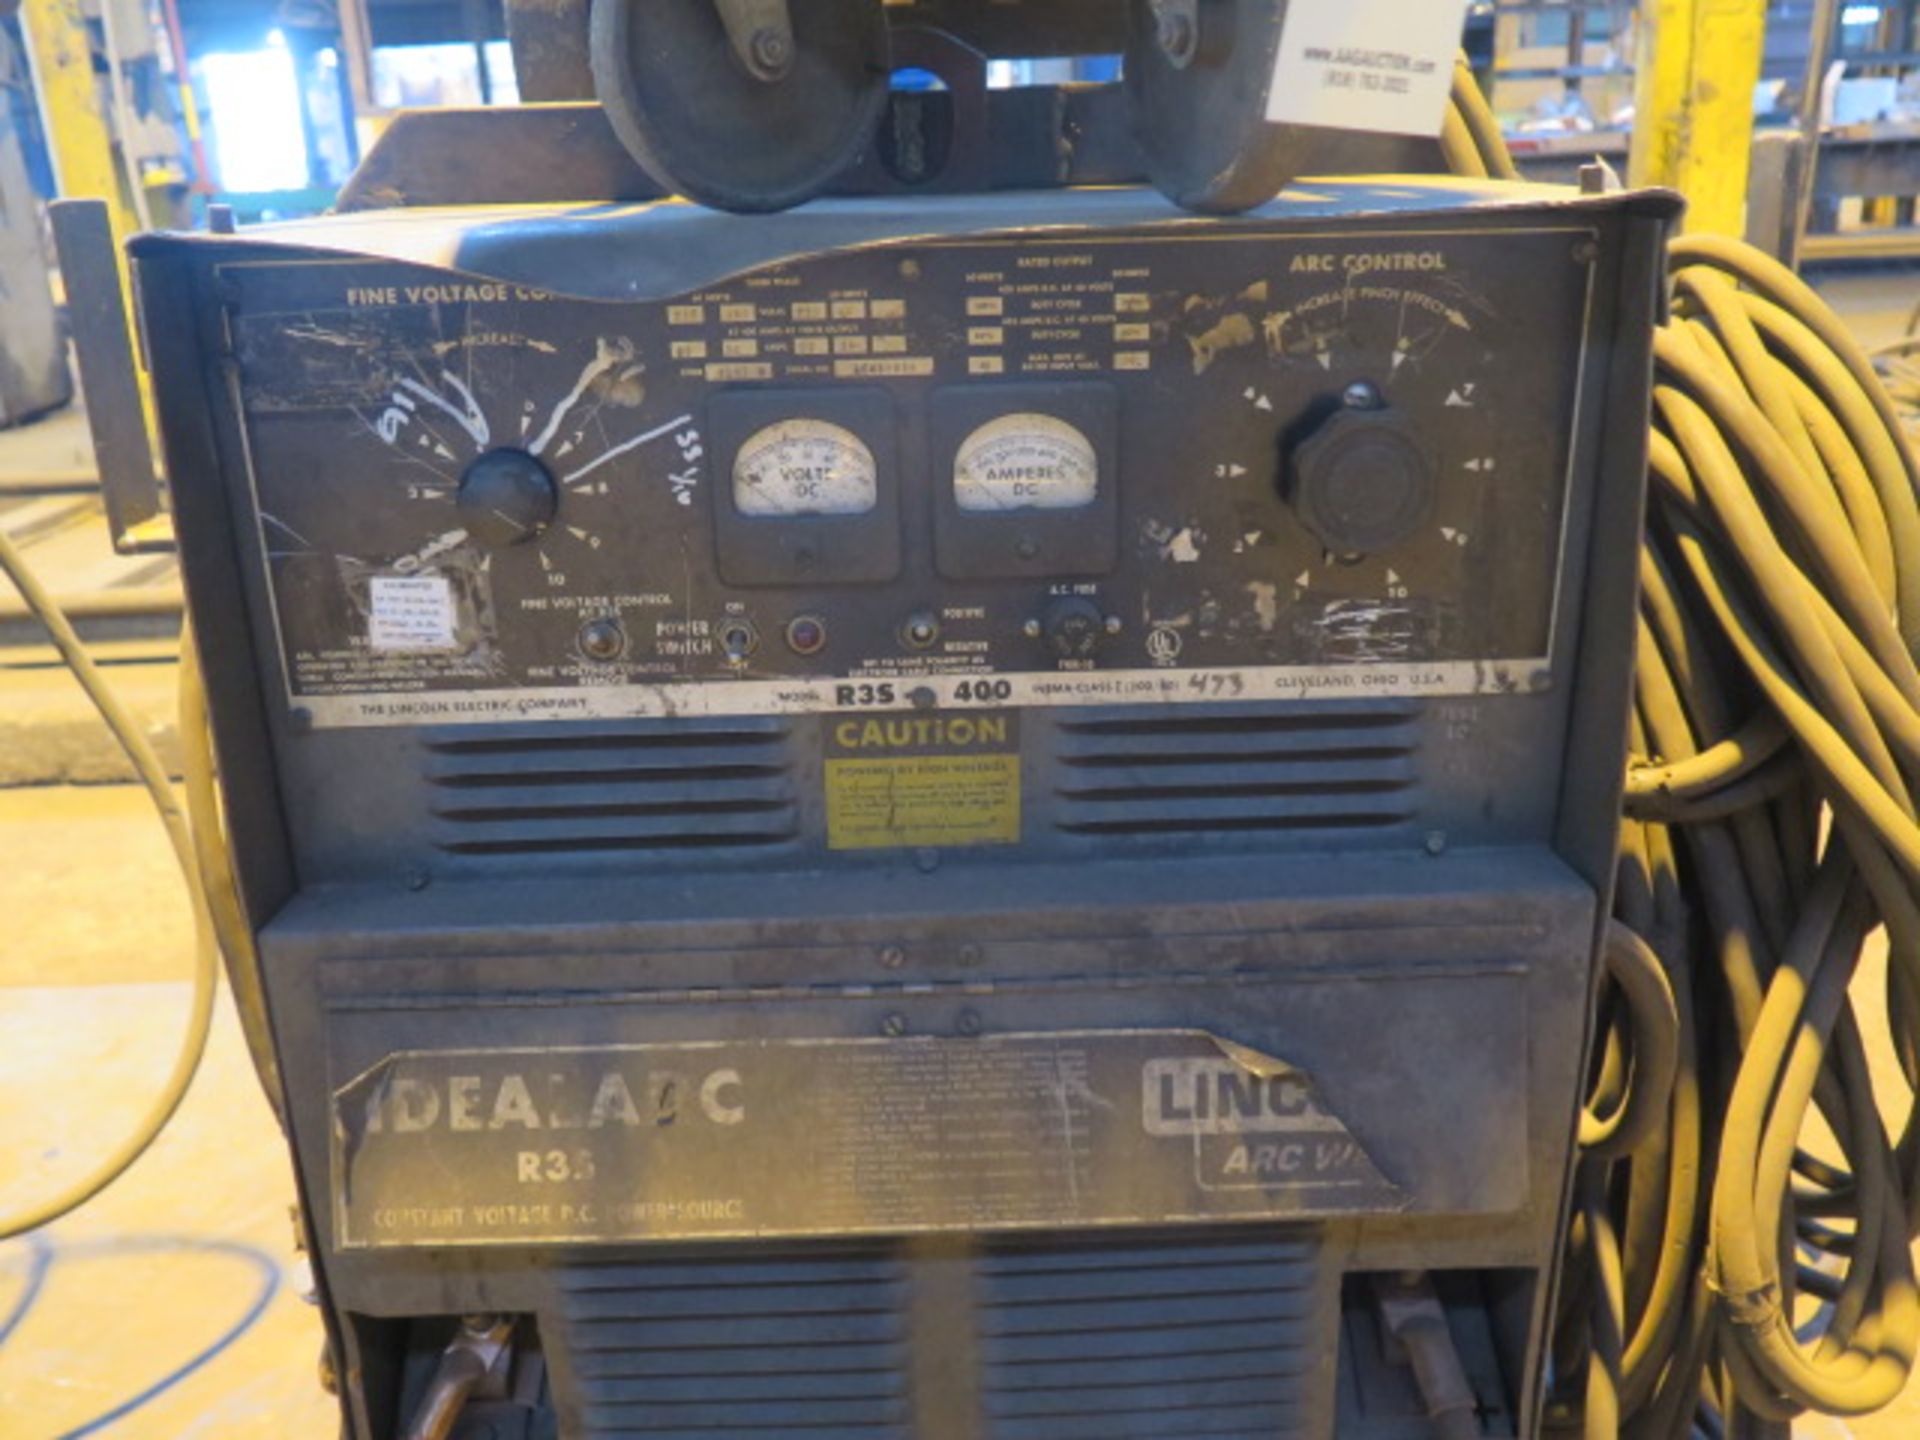 Lincoln R3S-400 CV-DC Arc Welding Power Source w/ Lincoln LN-7 Wire Feeder - Image 4 of 4